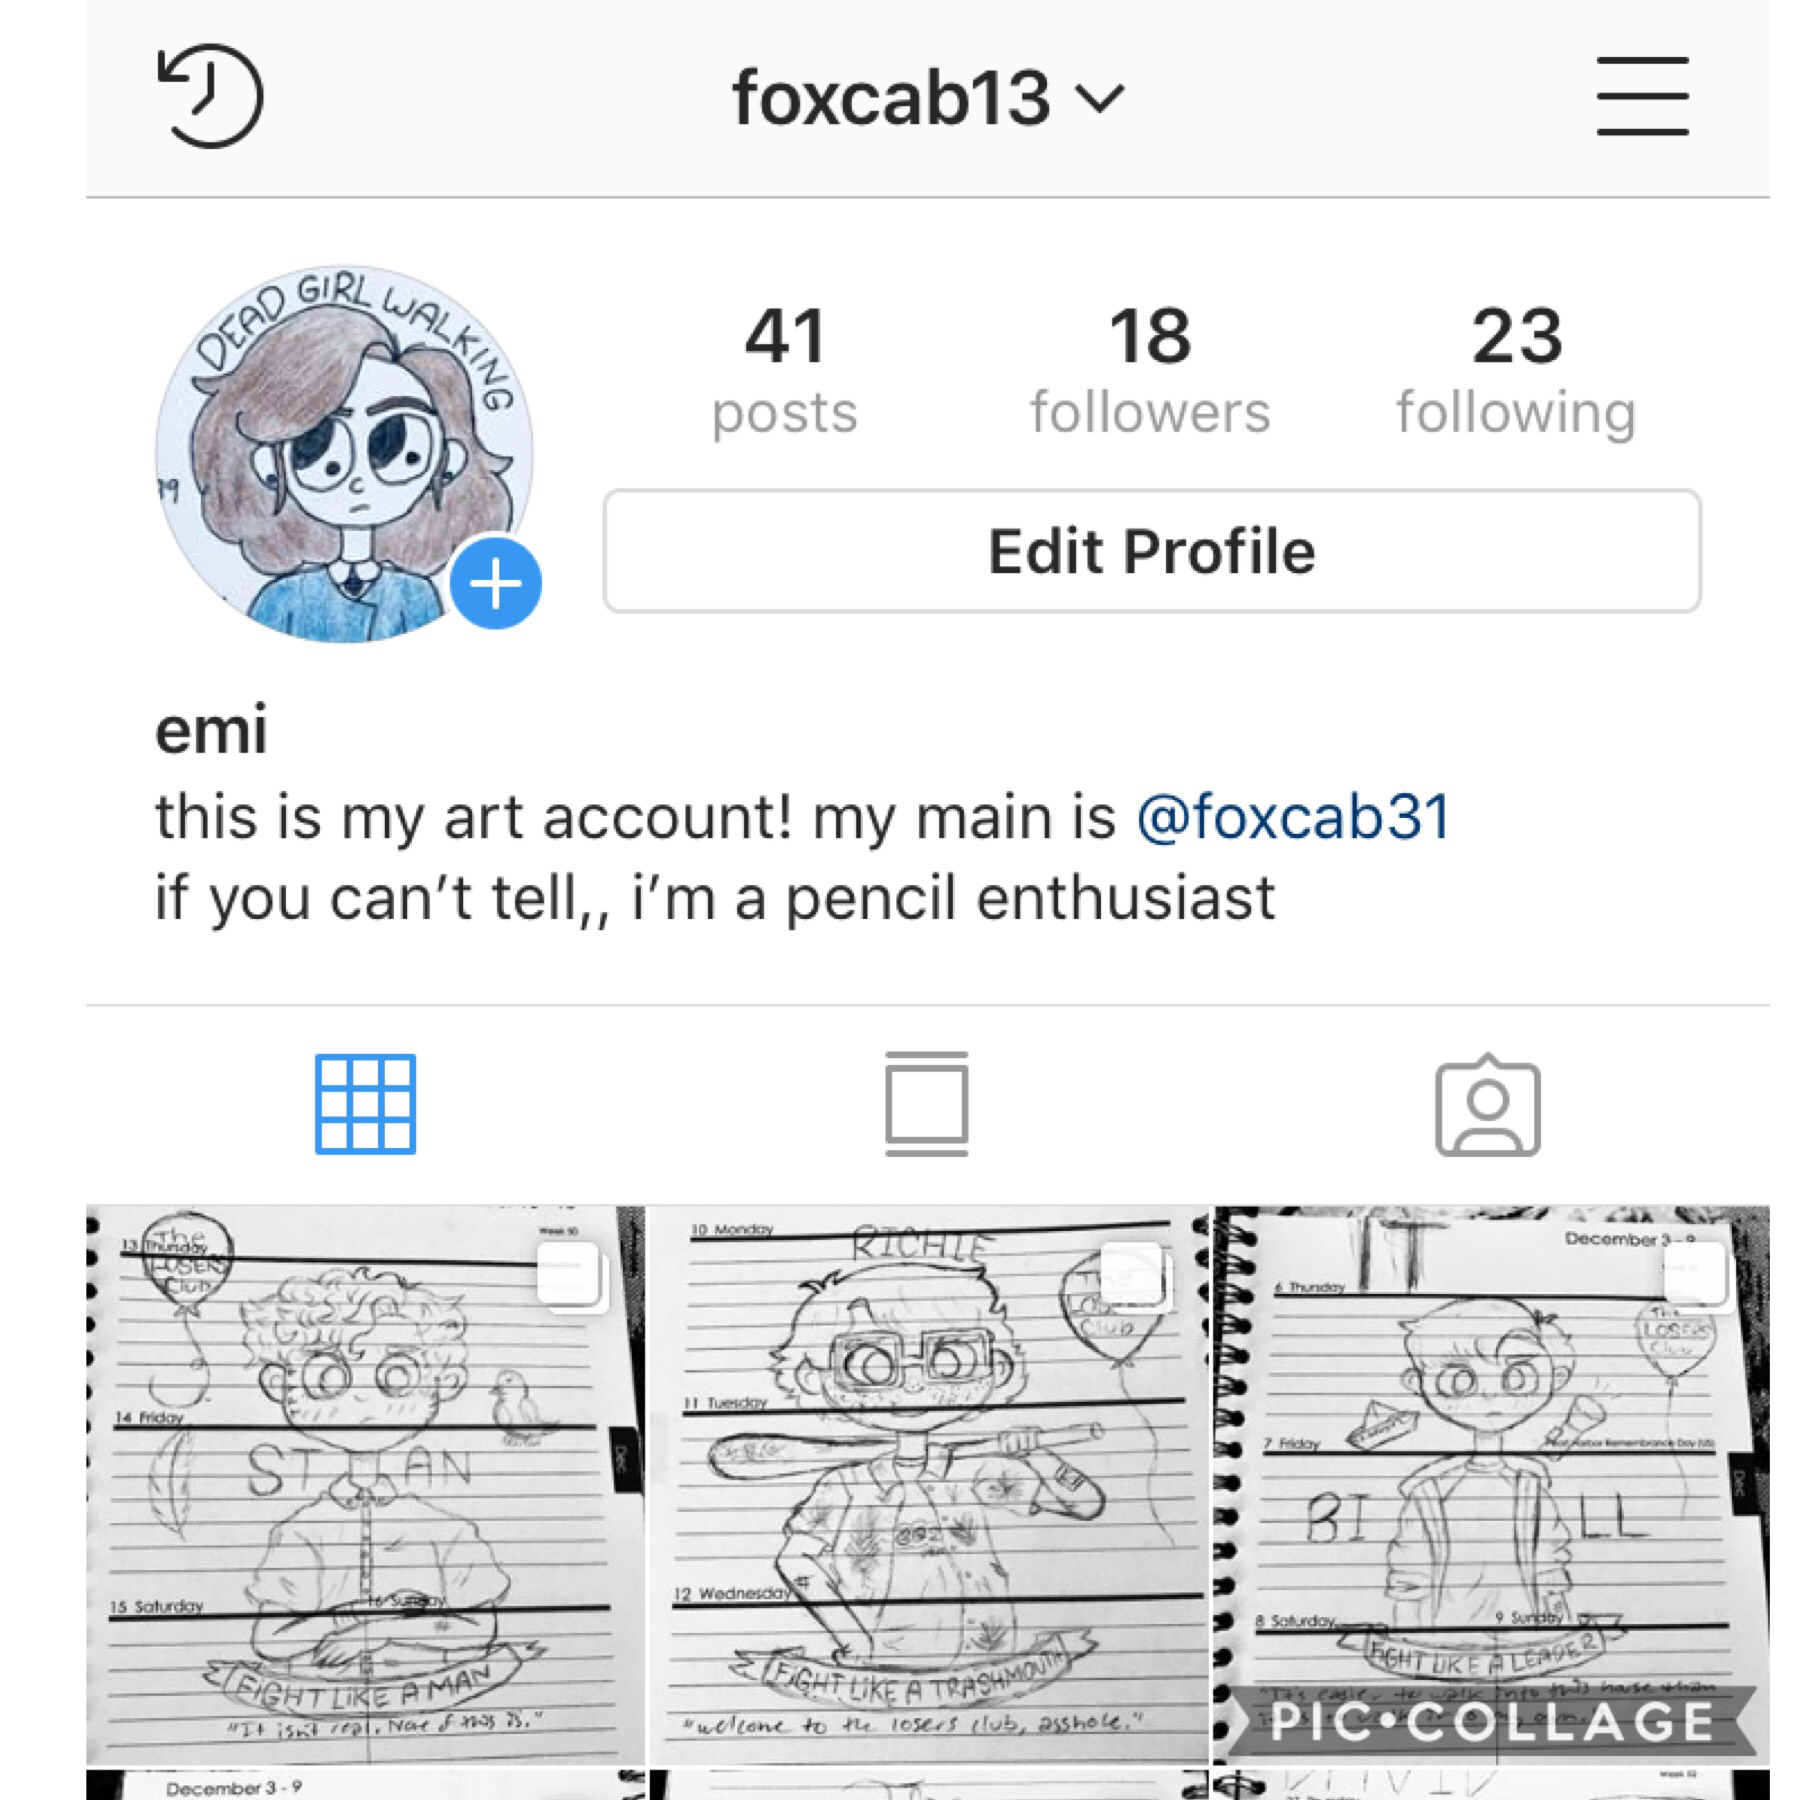 hEY YALL GO FOLLOW MY NEW ART ACCOUNT ON INSTA ITS @foxcab13 aND I POSTED A BUNCH OF STUFF TO CATCH UP SO CHECK THOSE OUT THANKS ILY ALL SM